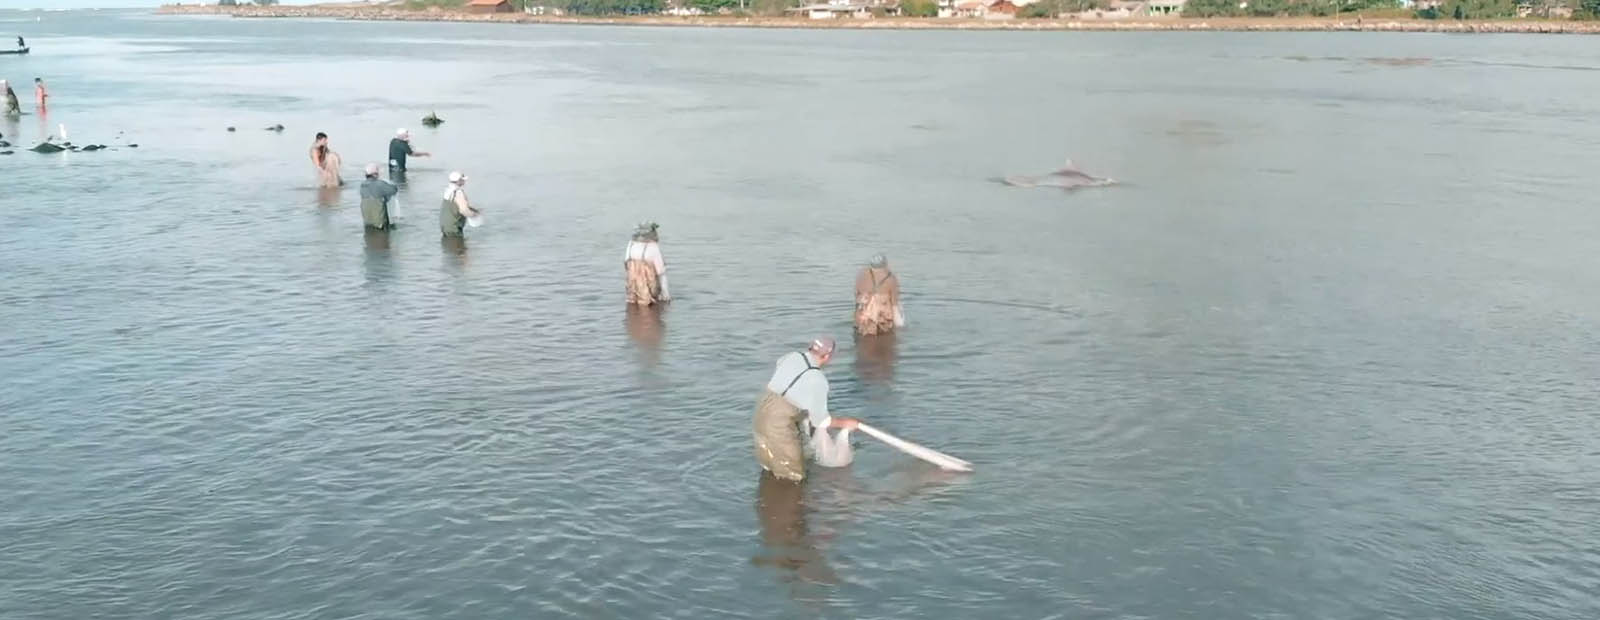 Video: Fishing With Dolphins in Laguna, Brazil